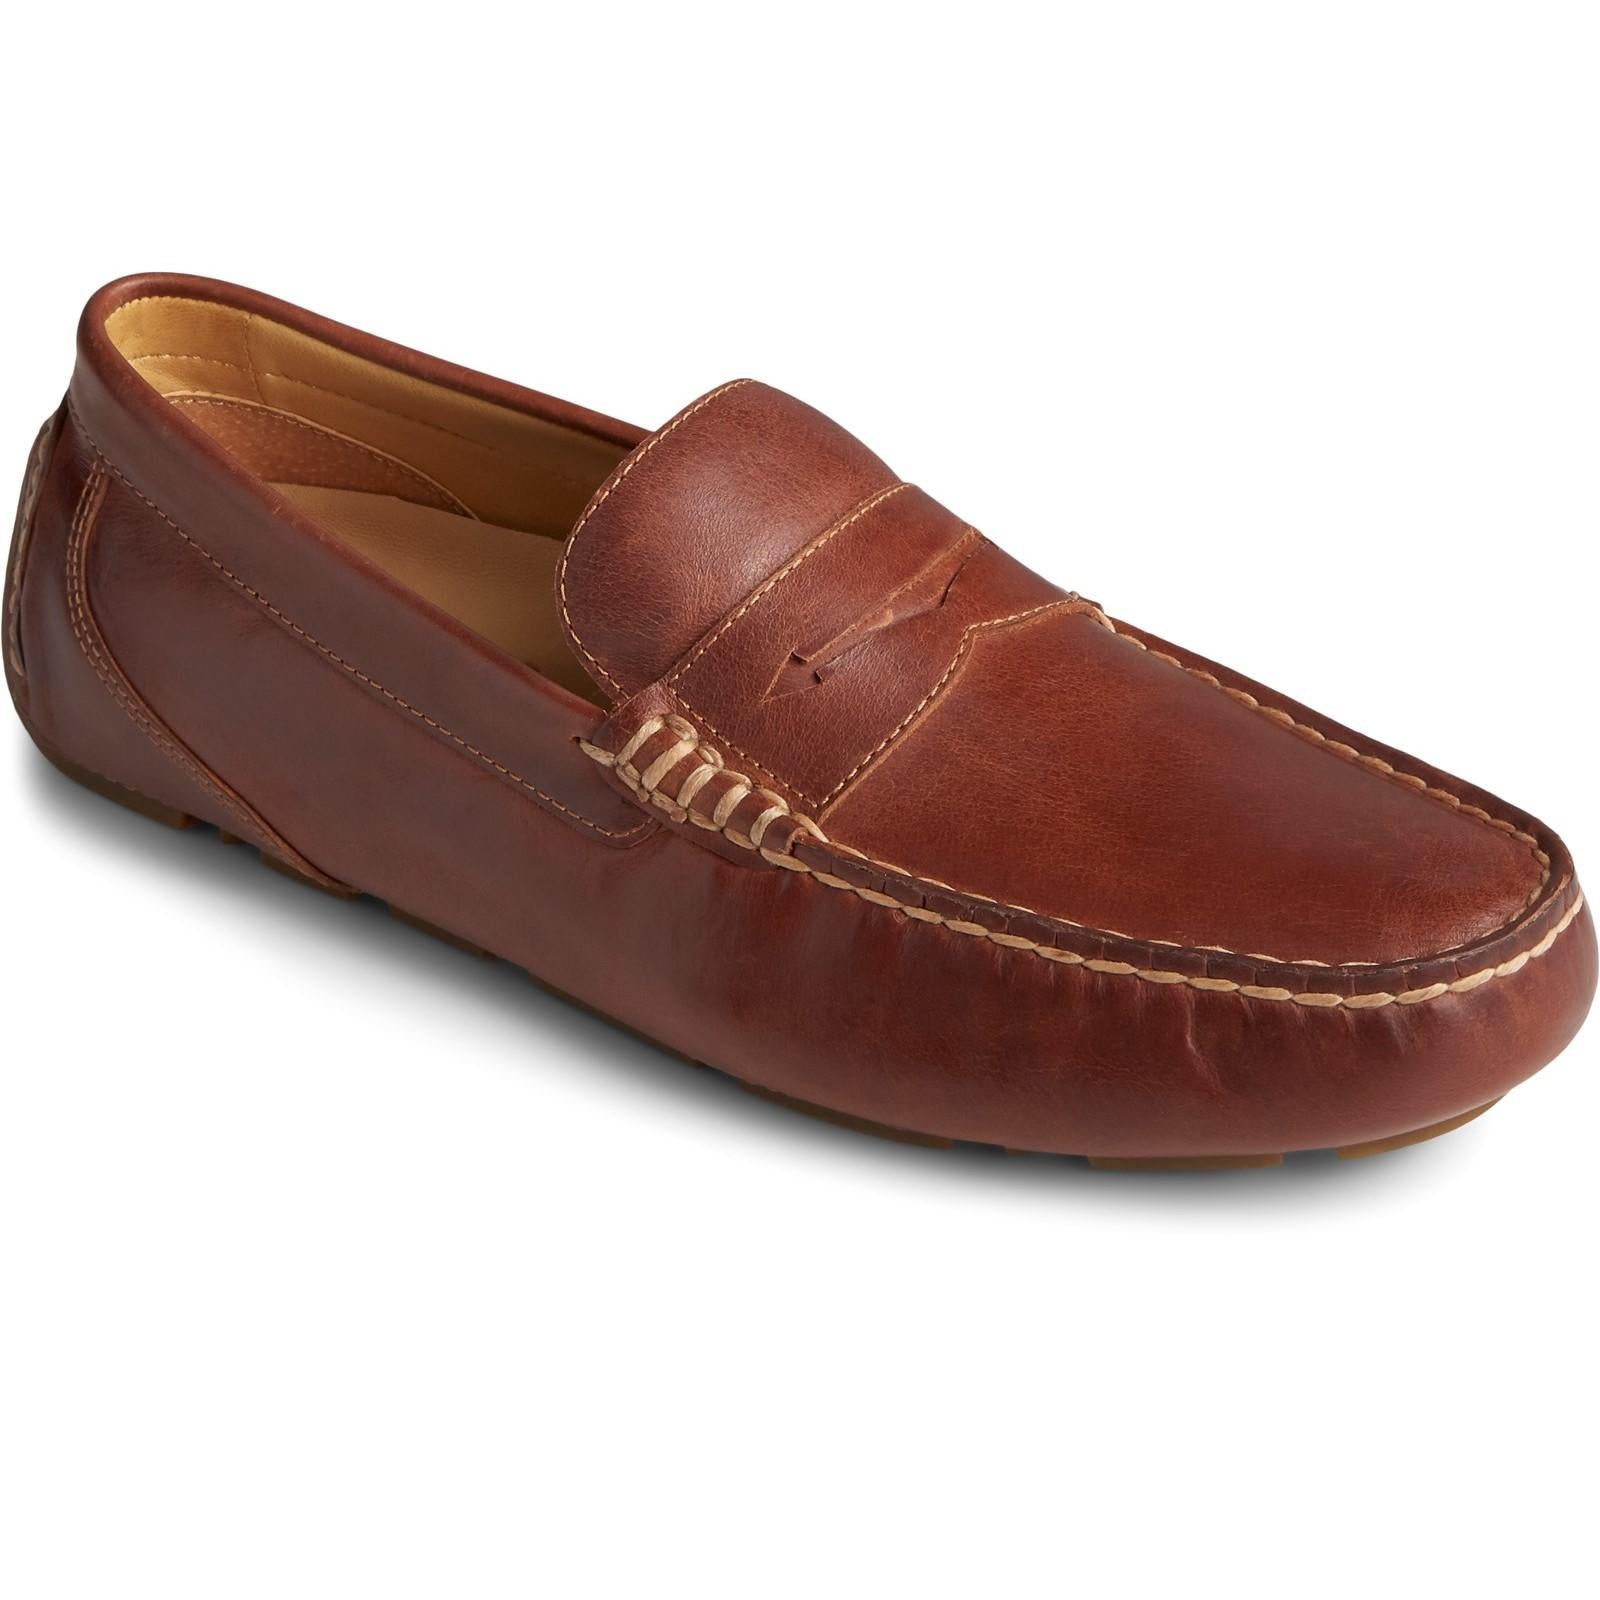 Sperry Top-sider Gold Cup Harpswell Penny Loafer Flats